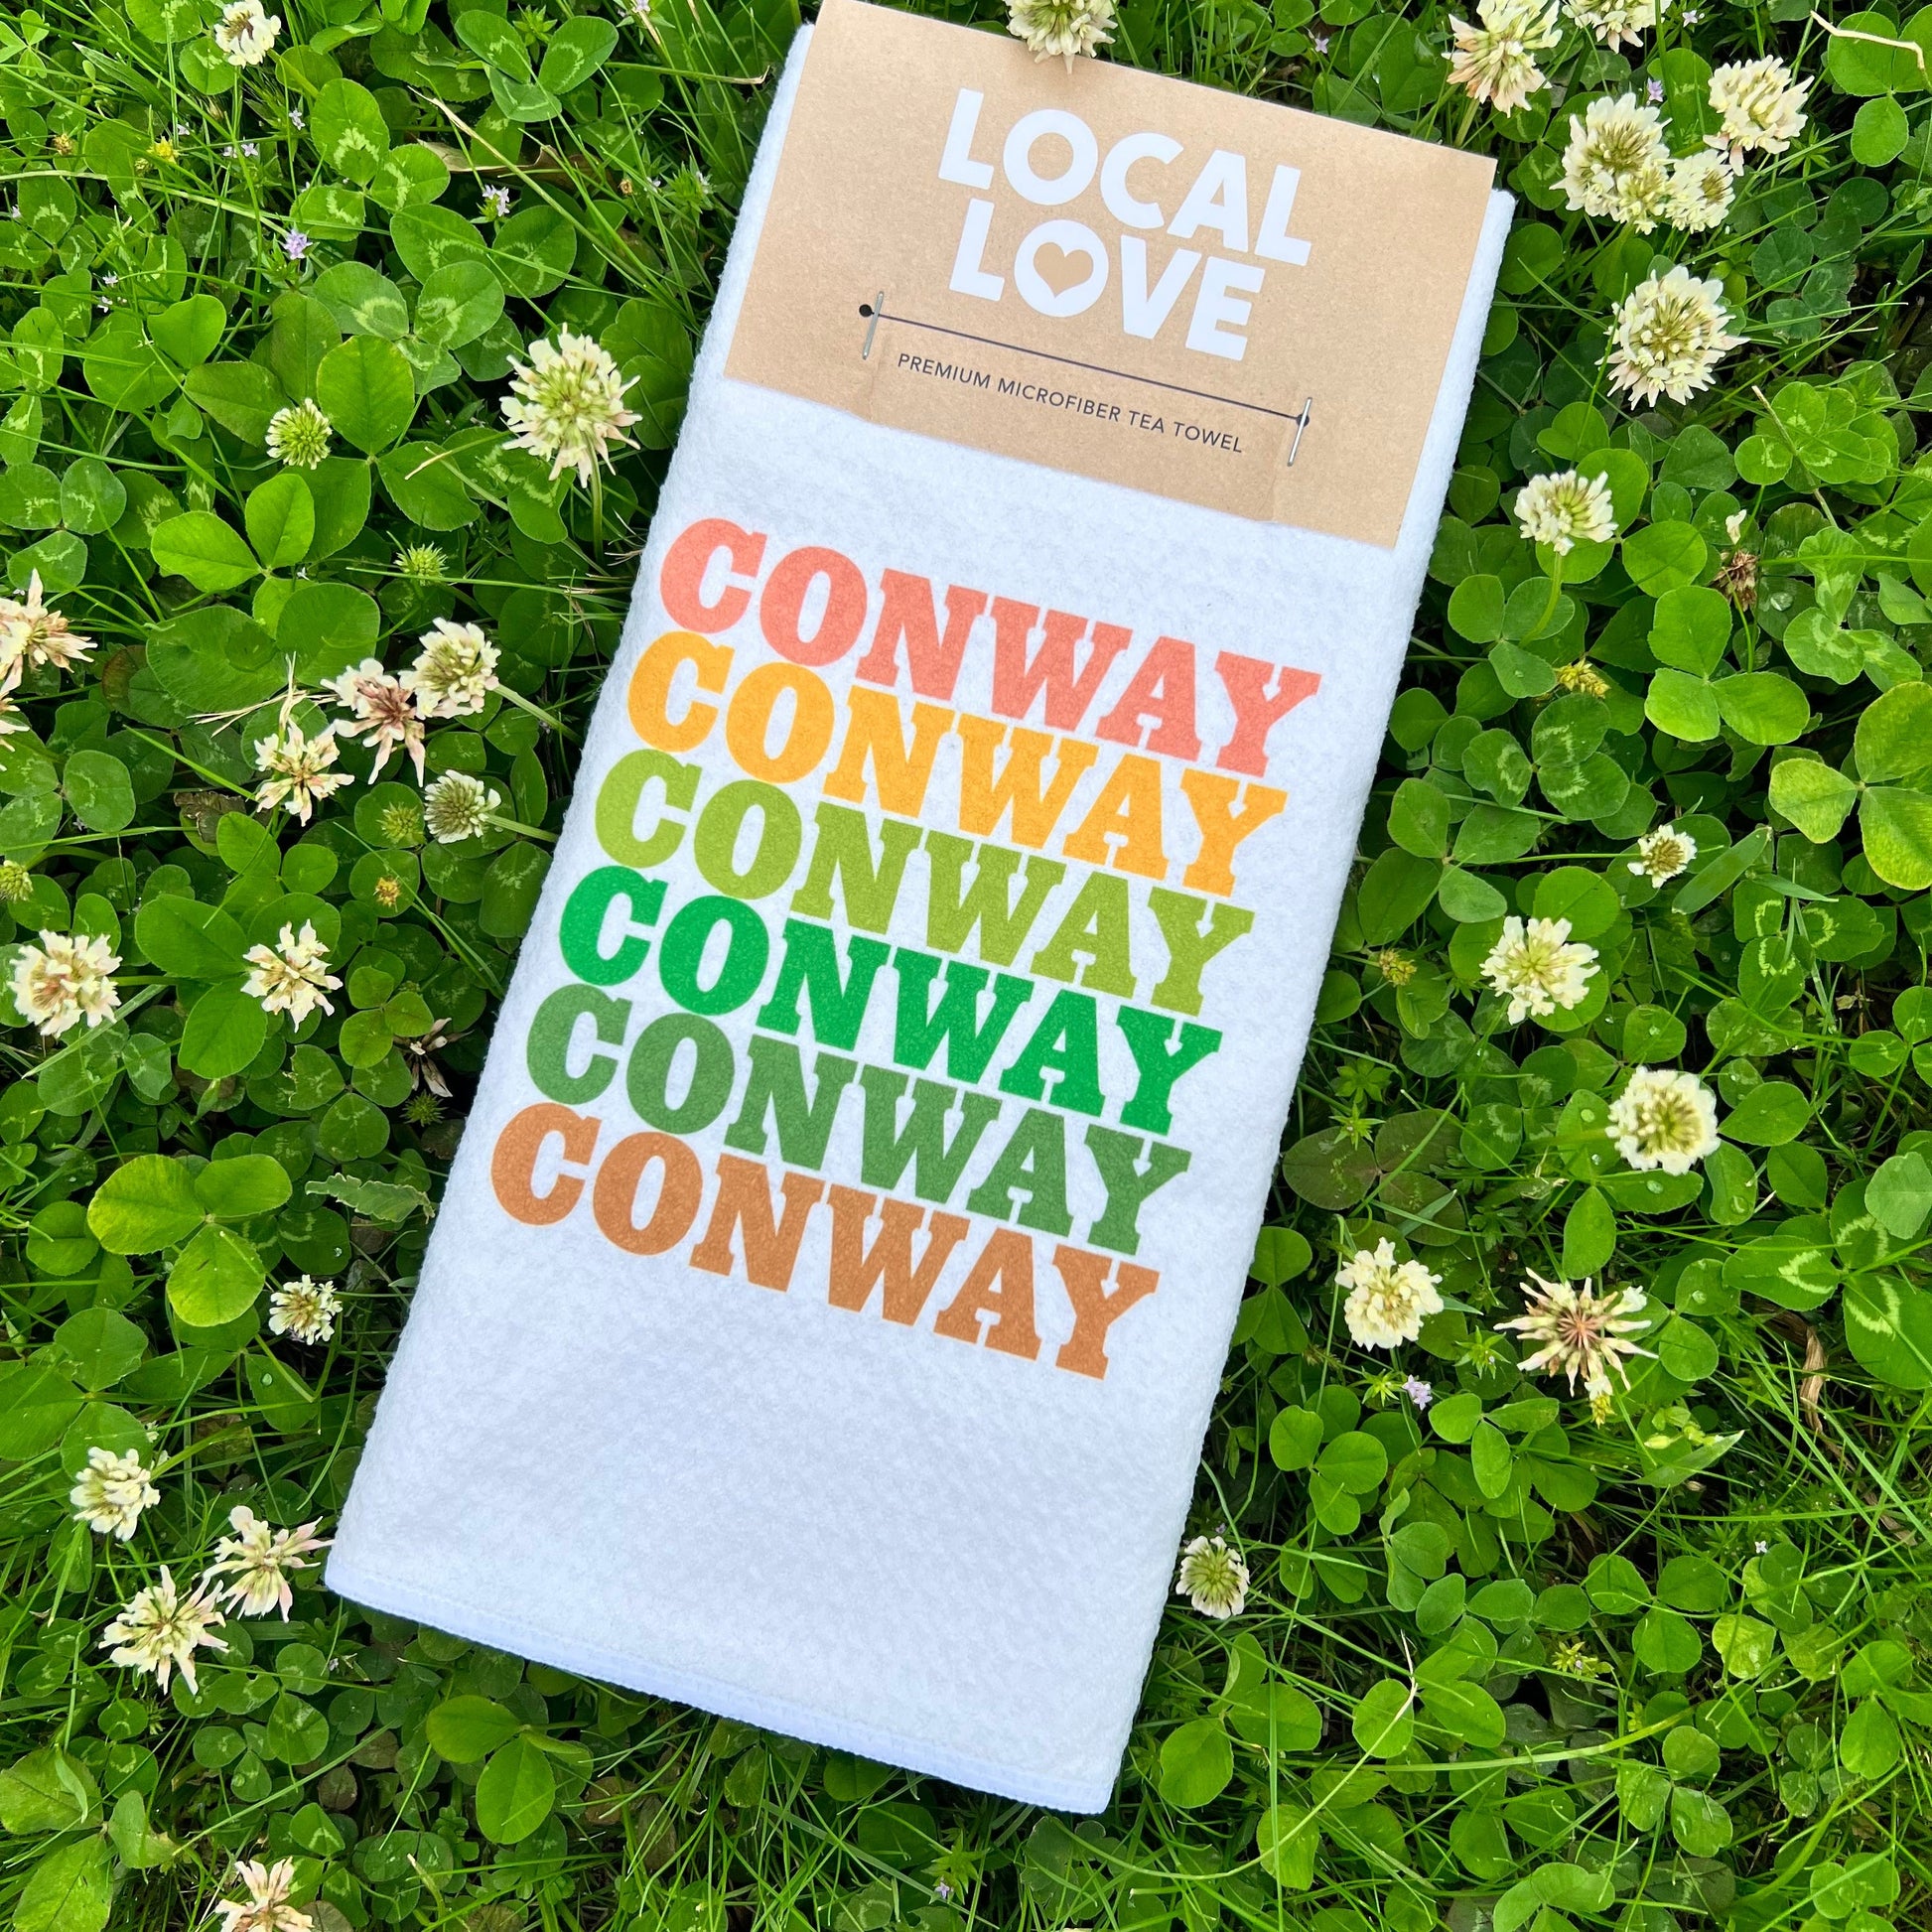 white towel with "conway" printed 6 times in assorted colors laying in a field of clovers.